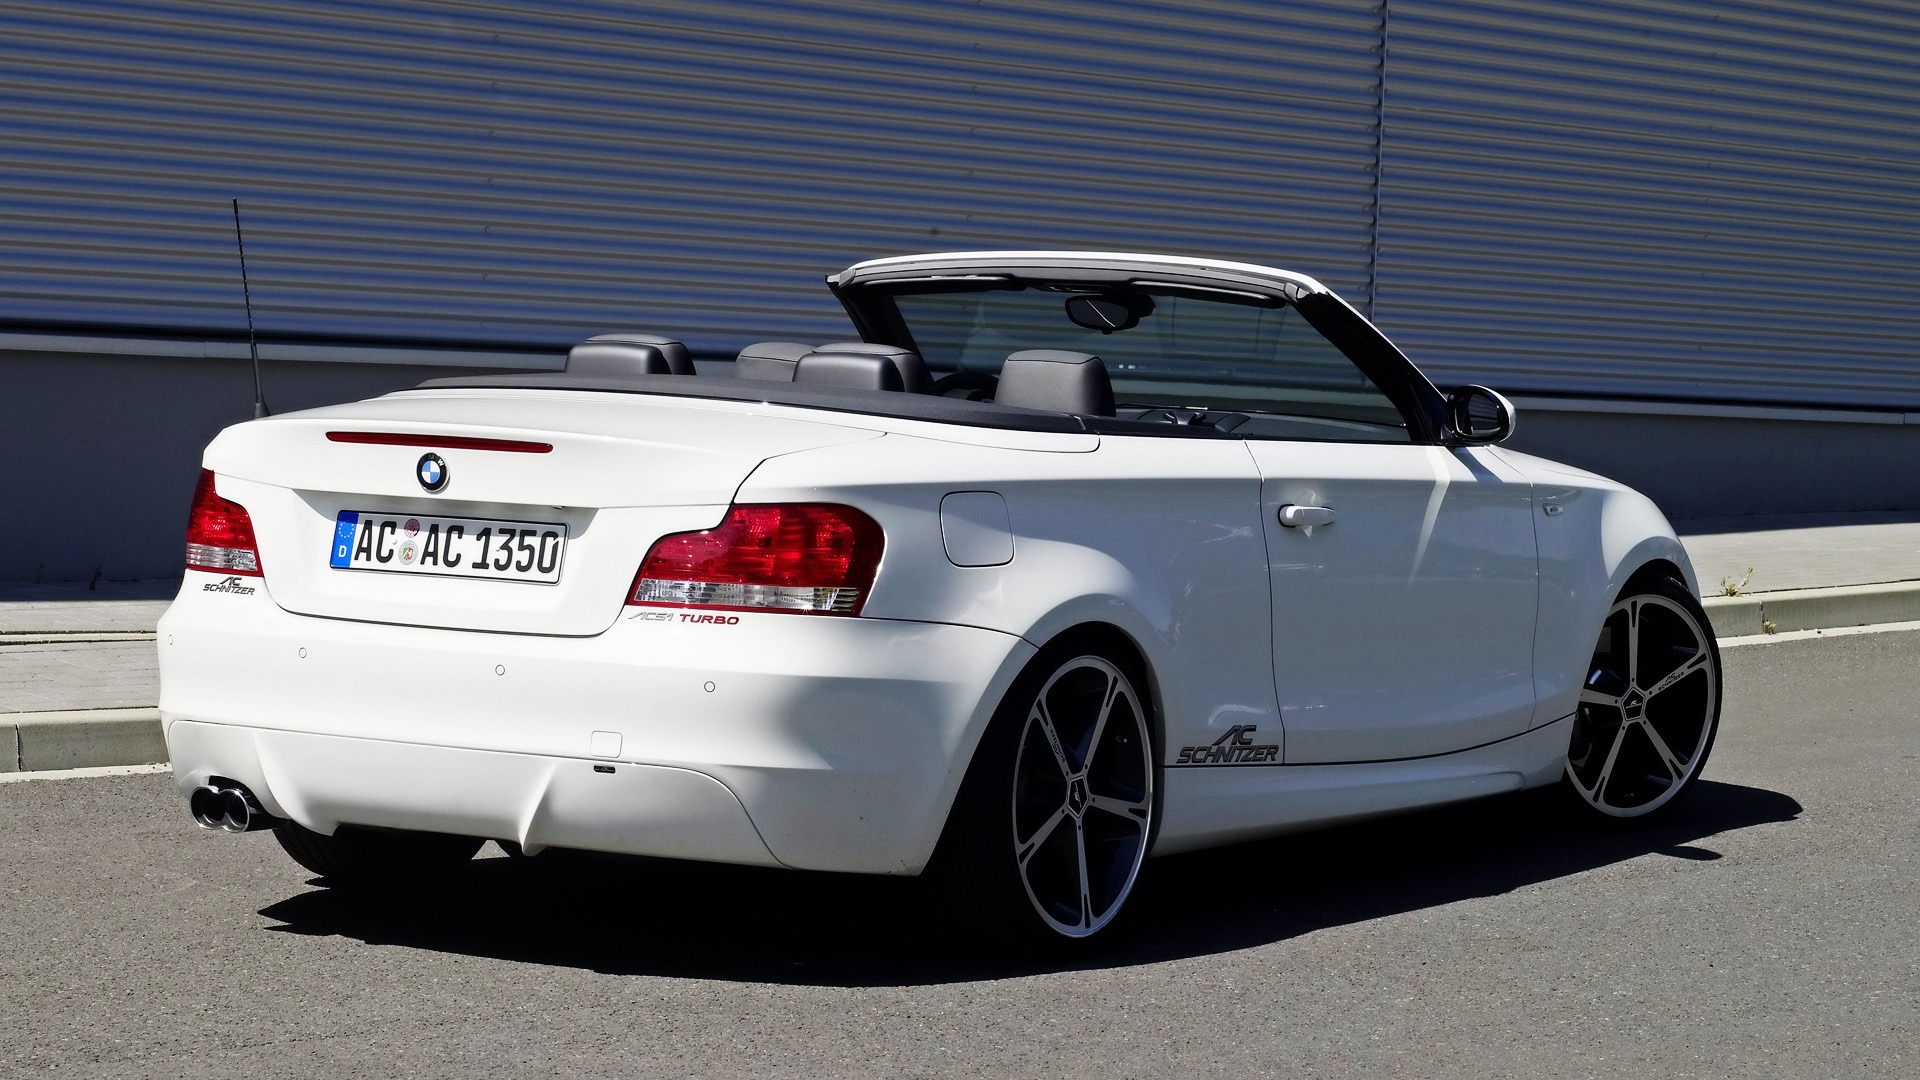 BMW 1 Series Convertible Rear Angle for 1920 x 1080 HDTV 1080p resolution